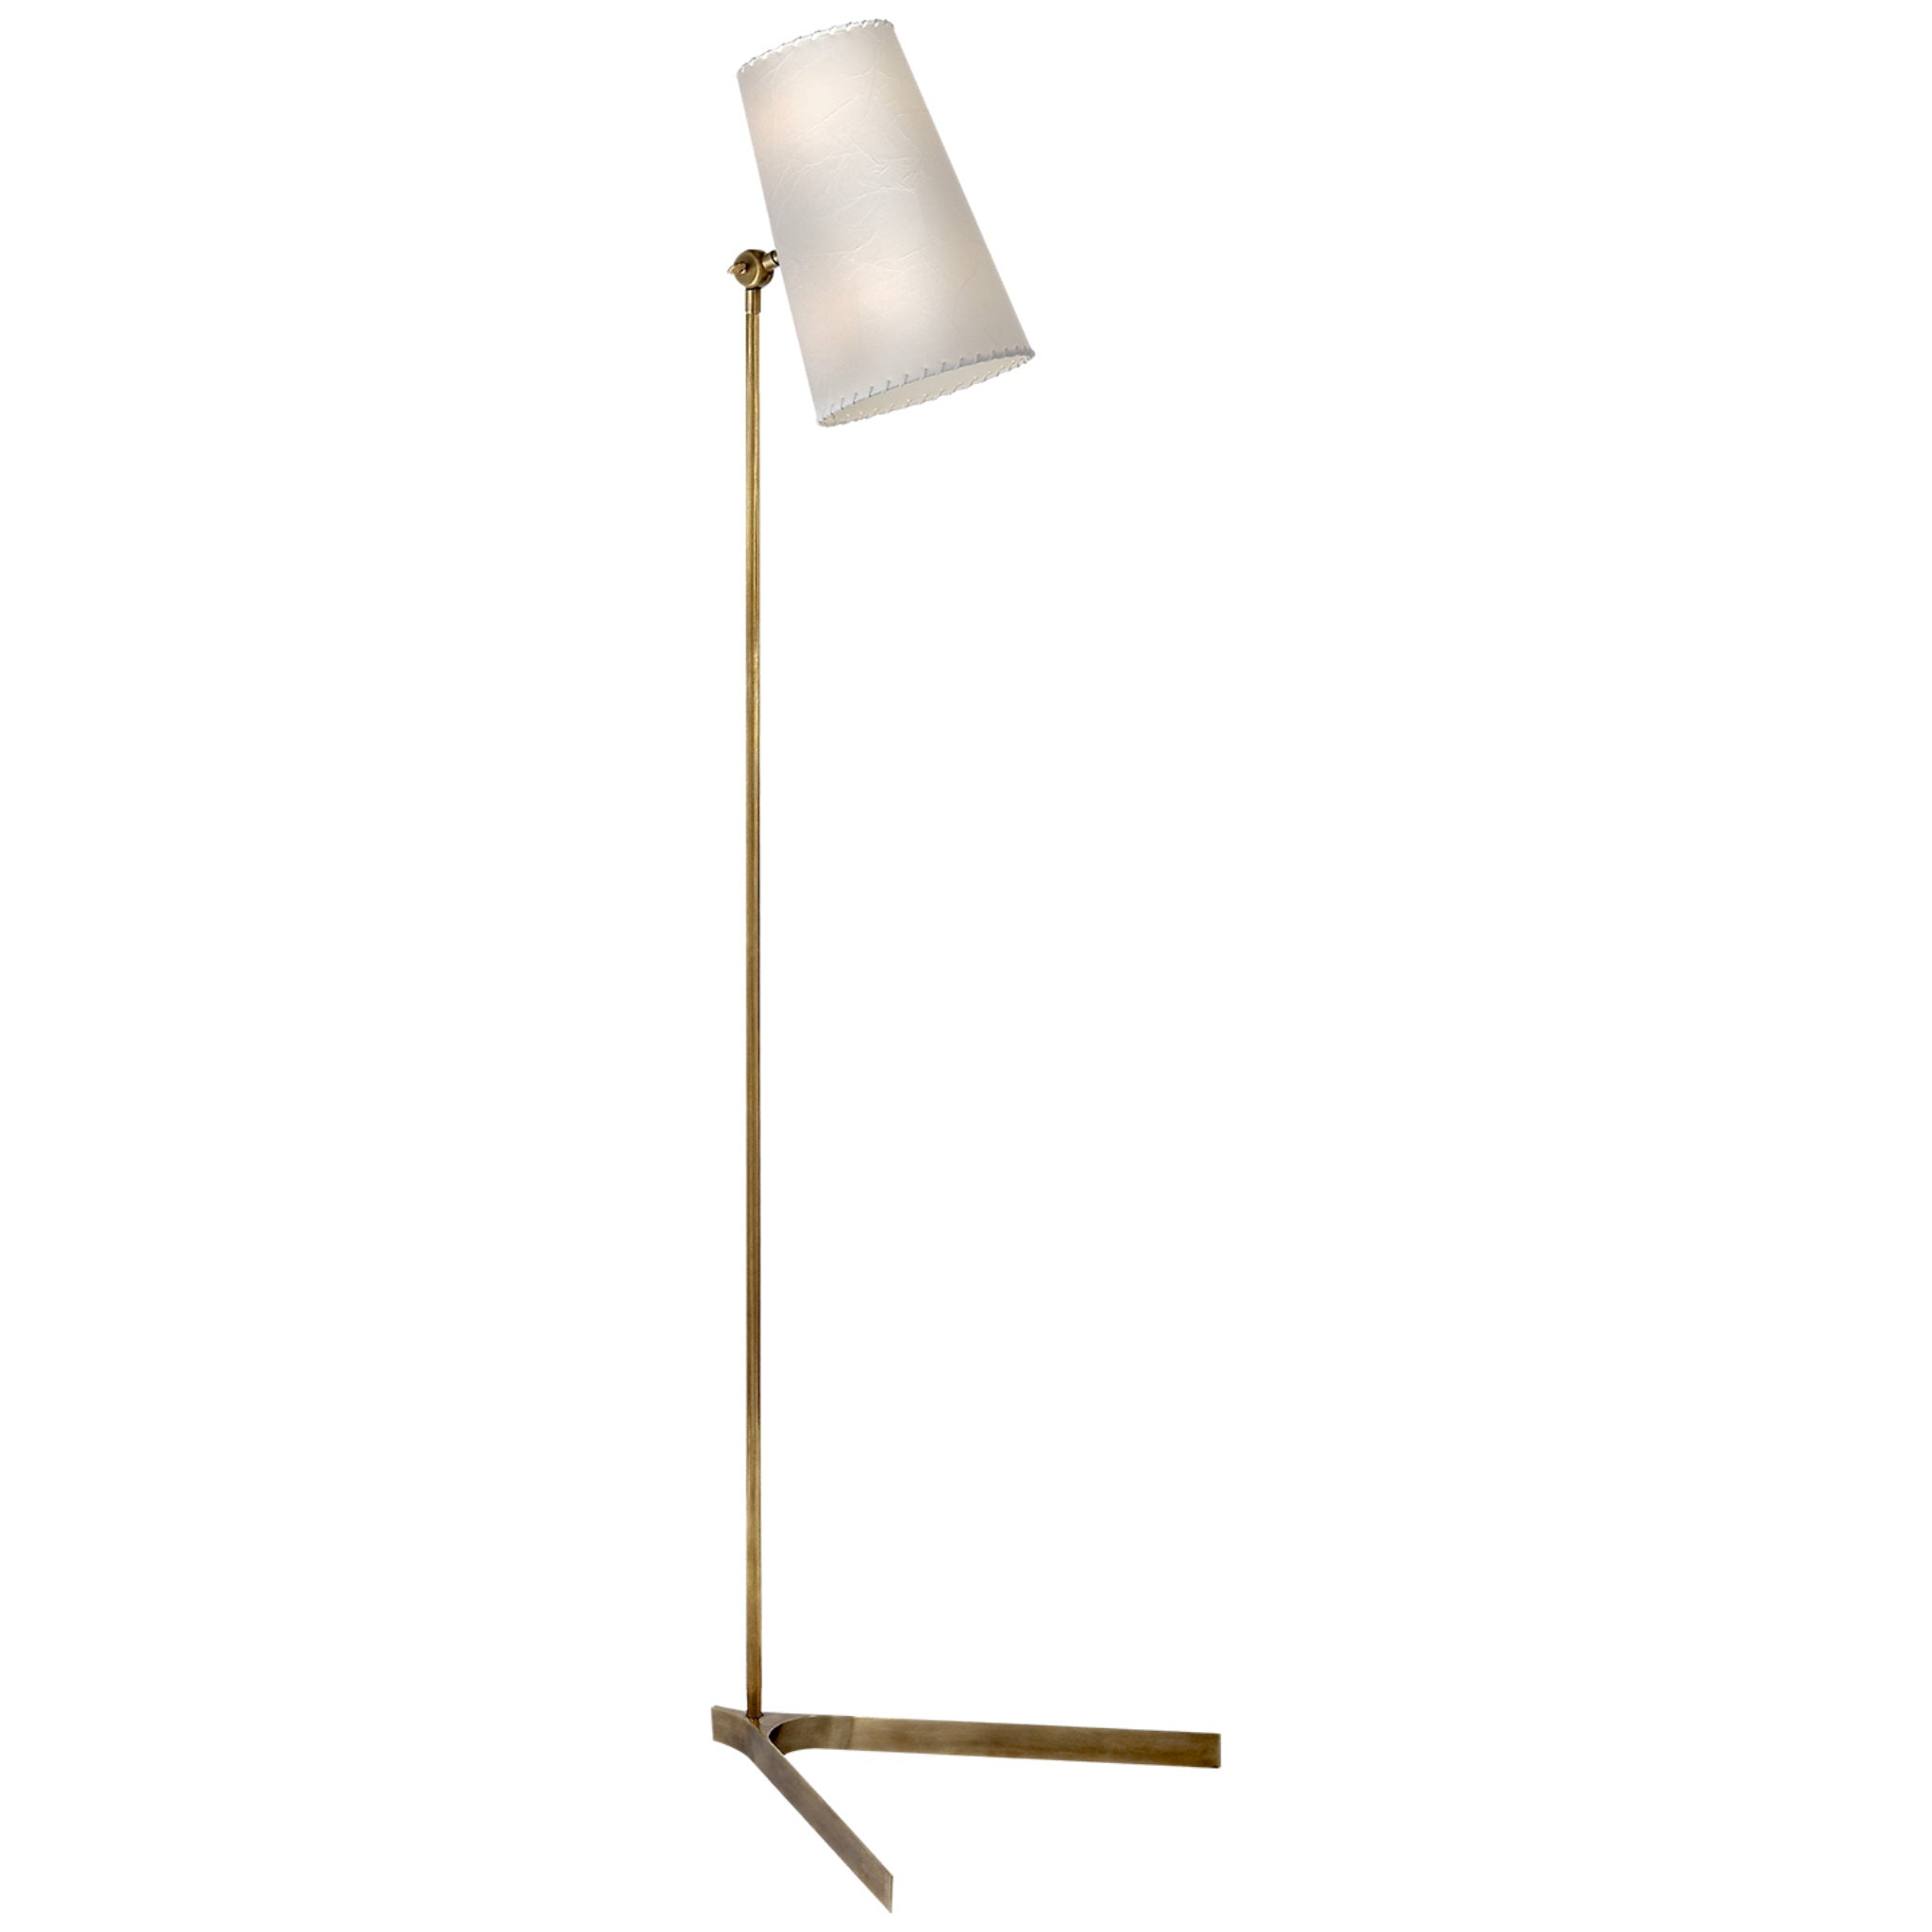 AERIN Arpont Floor Lamp in Hand-Rubbed Antique Brass with Parchment Stitched Shade